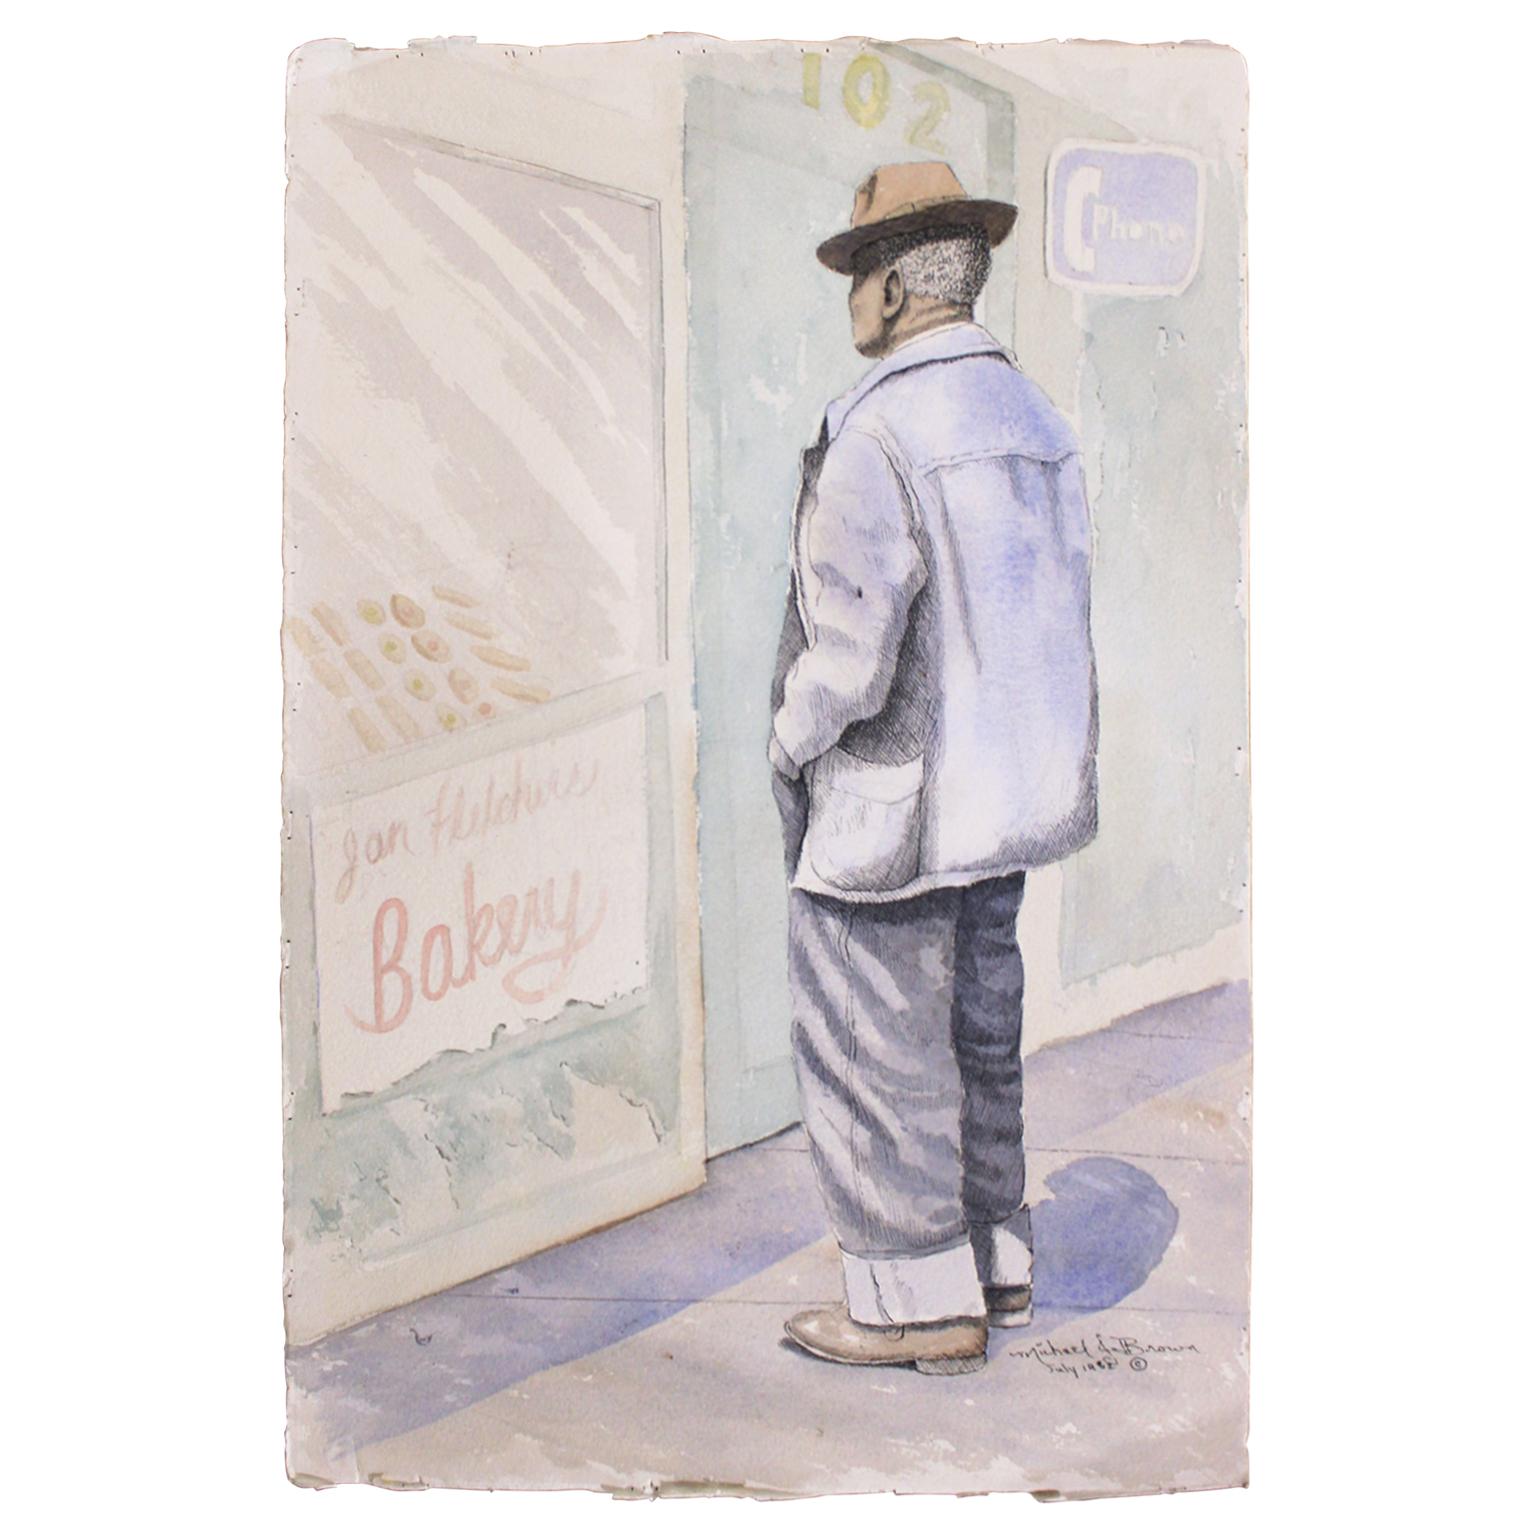 Michael Brown Figurative Art – Man In Front of Bakery Store Front